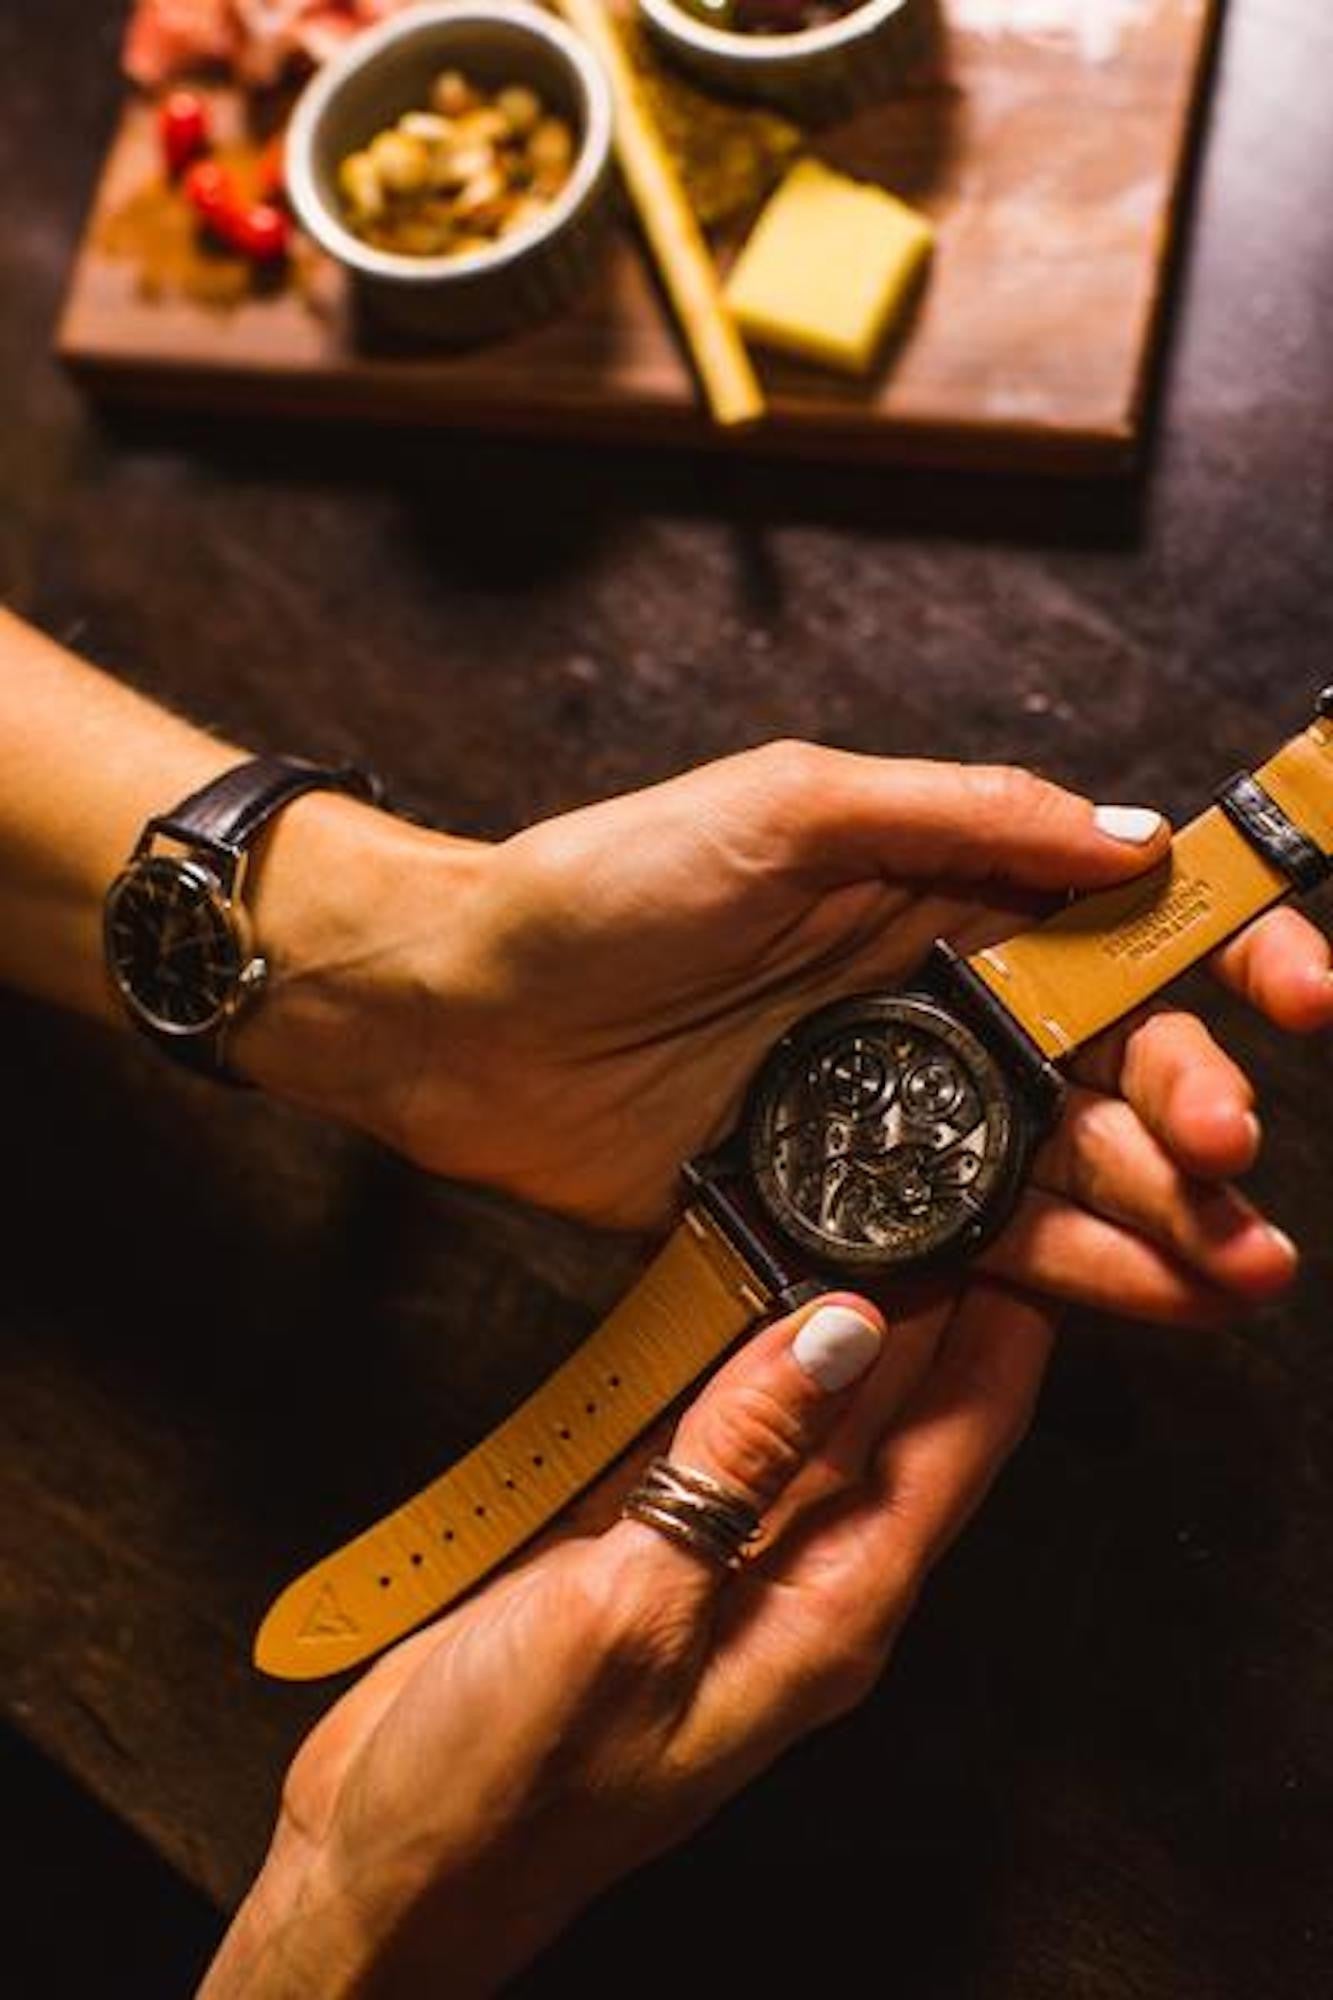 What Your Choice of Watch Says About Your Personality - LUXlife Magazine